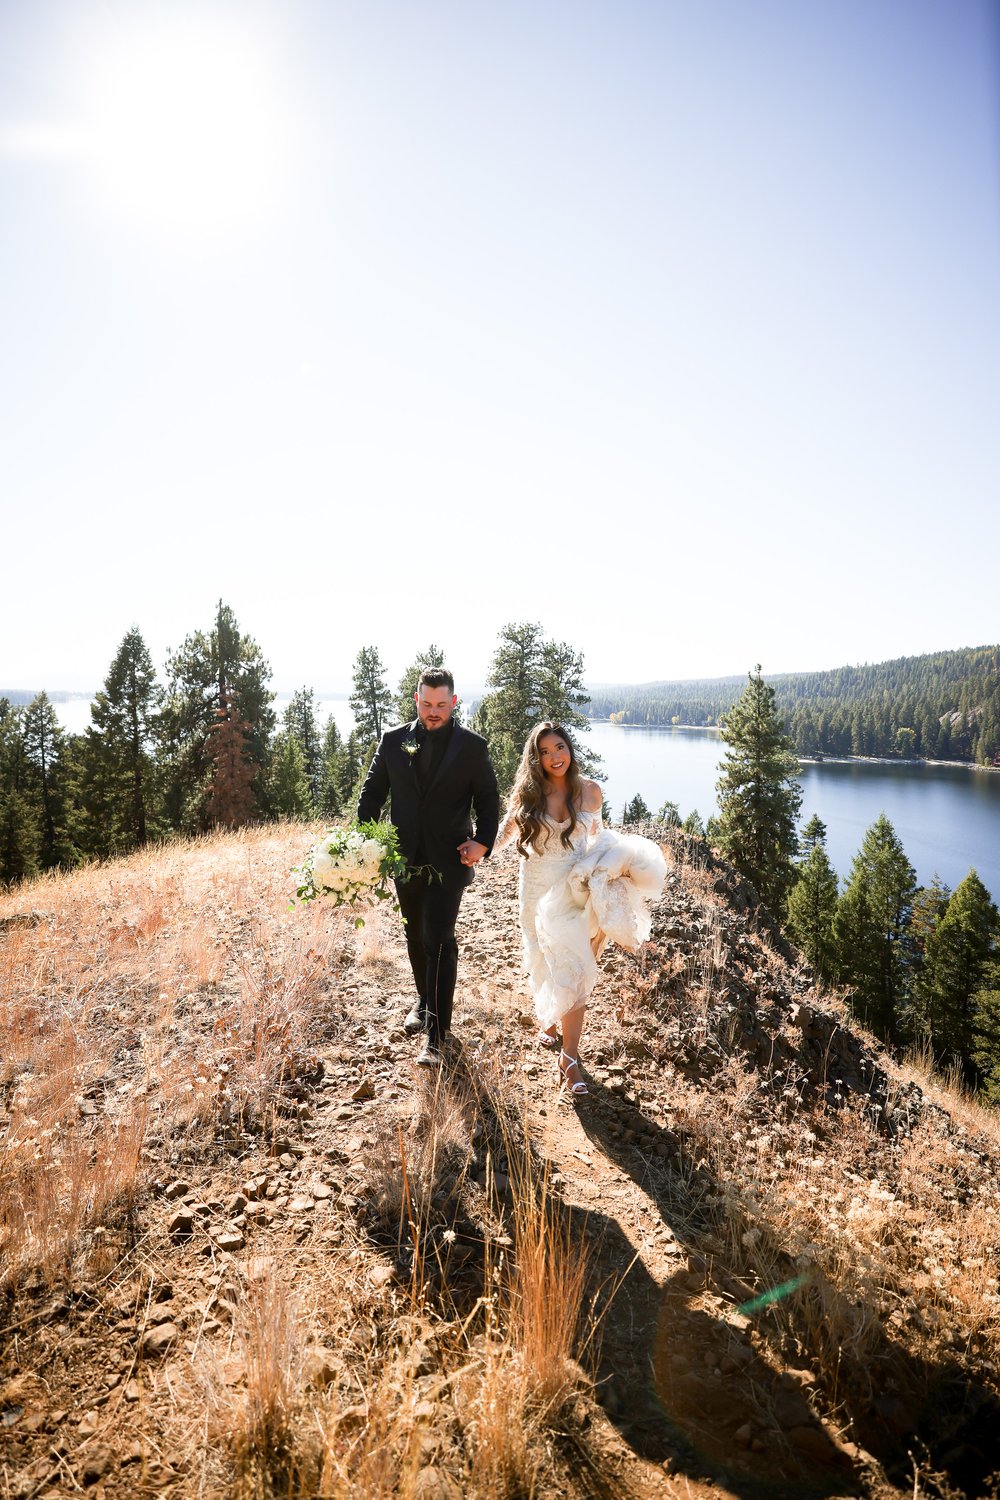 Groom and Bride walk hand in hand in mountains